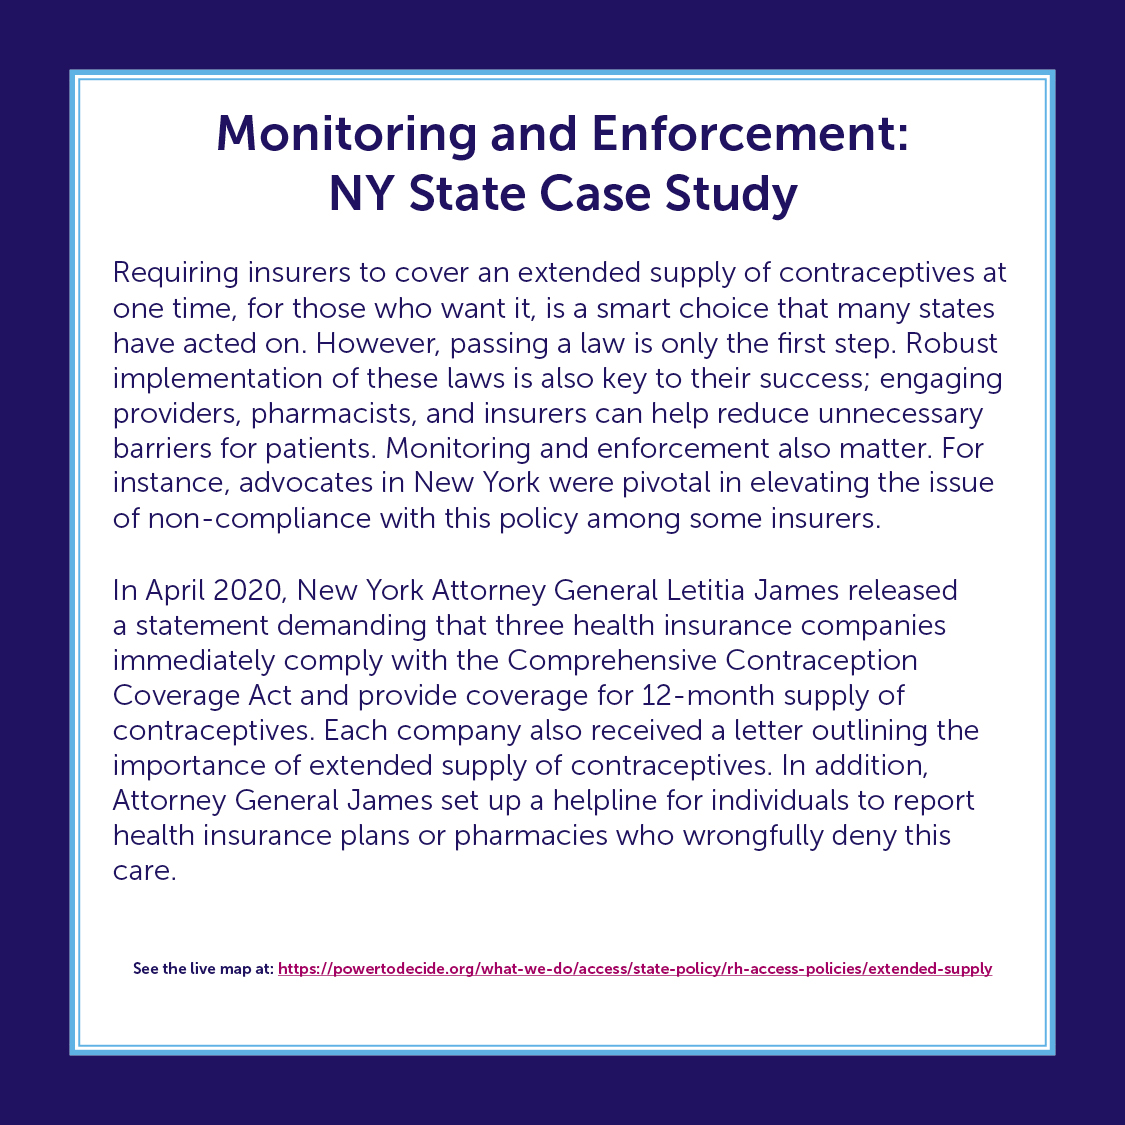 A short description of monitoring and enforcement of extended supply in New York state. 